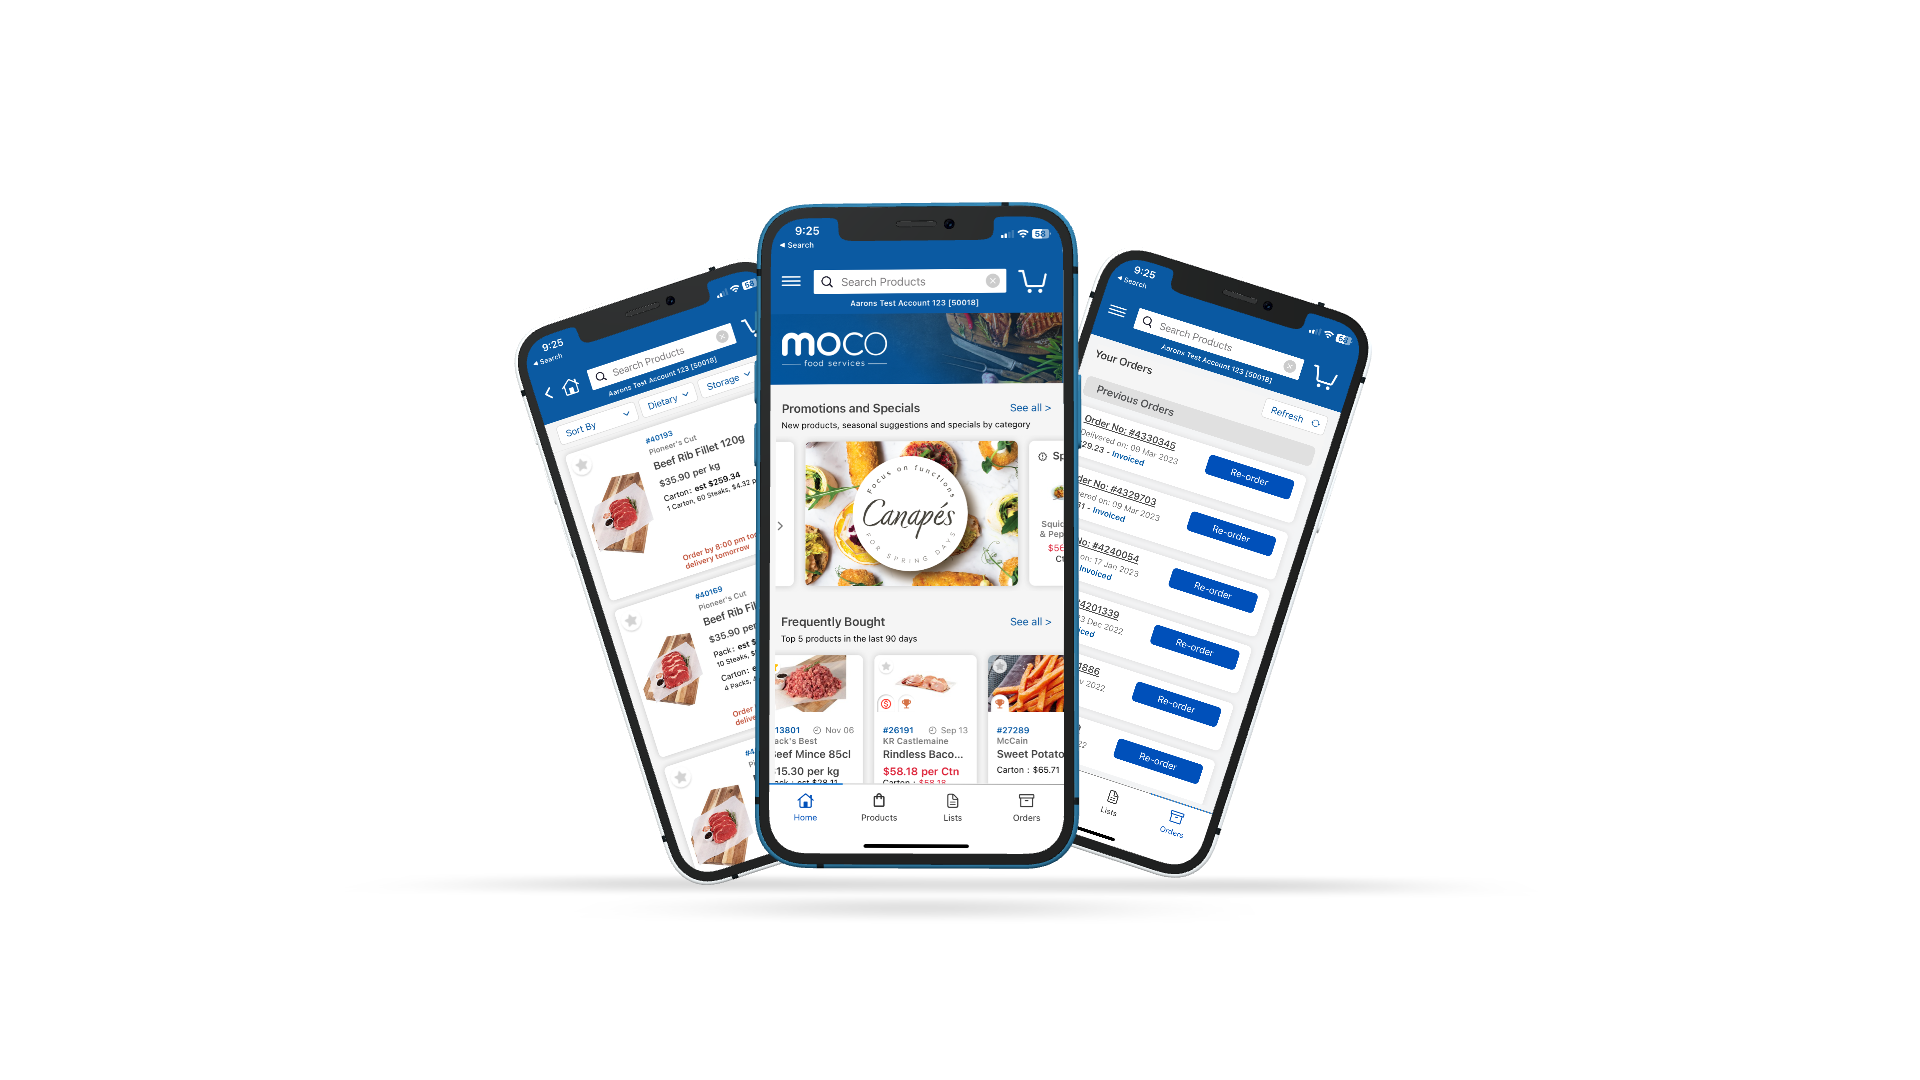 Mobile phones with the MOCO app screenshots displayed